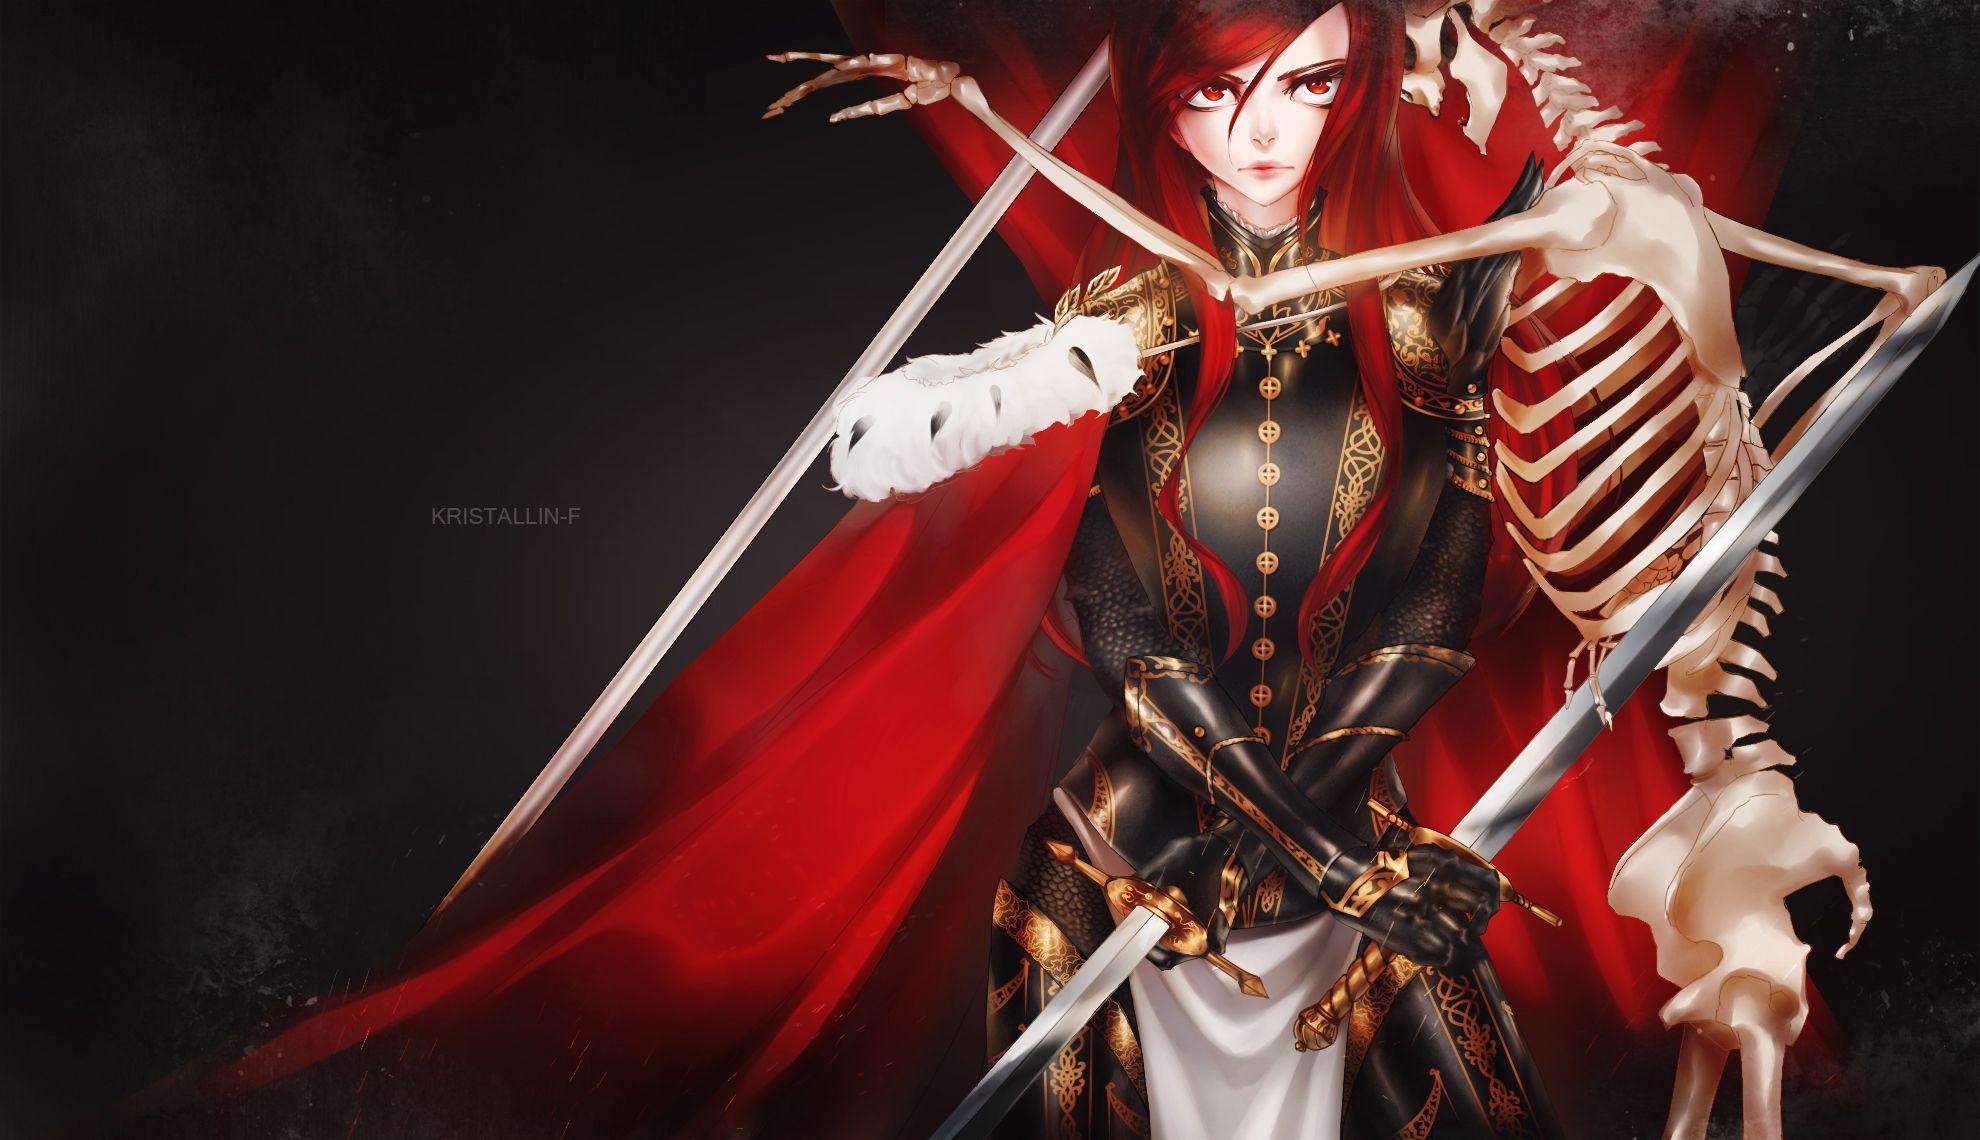 ArtStation - Erza from Fairy Tail